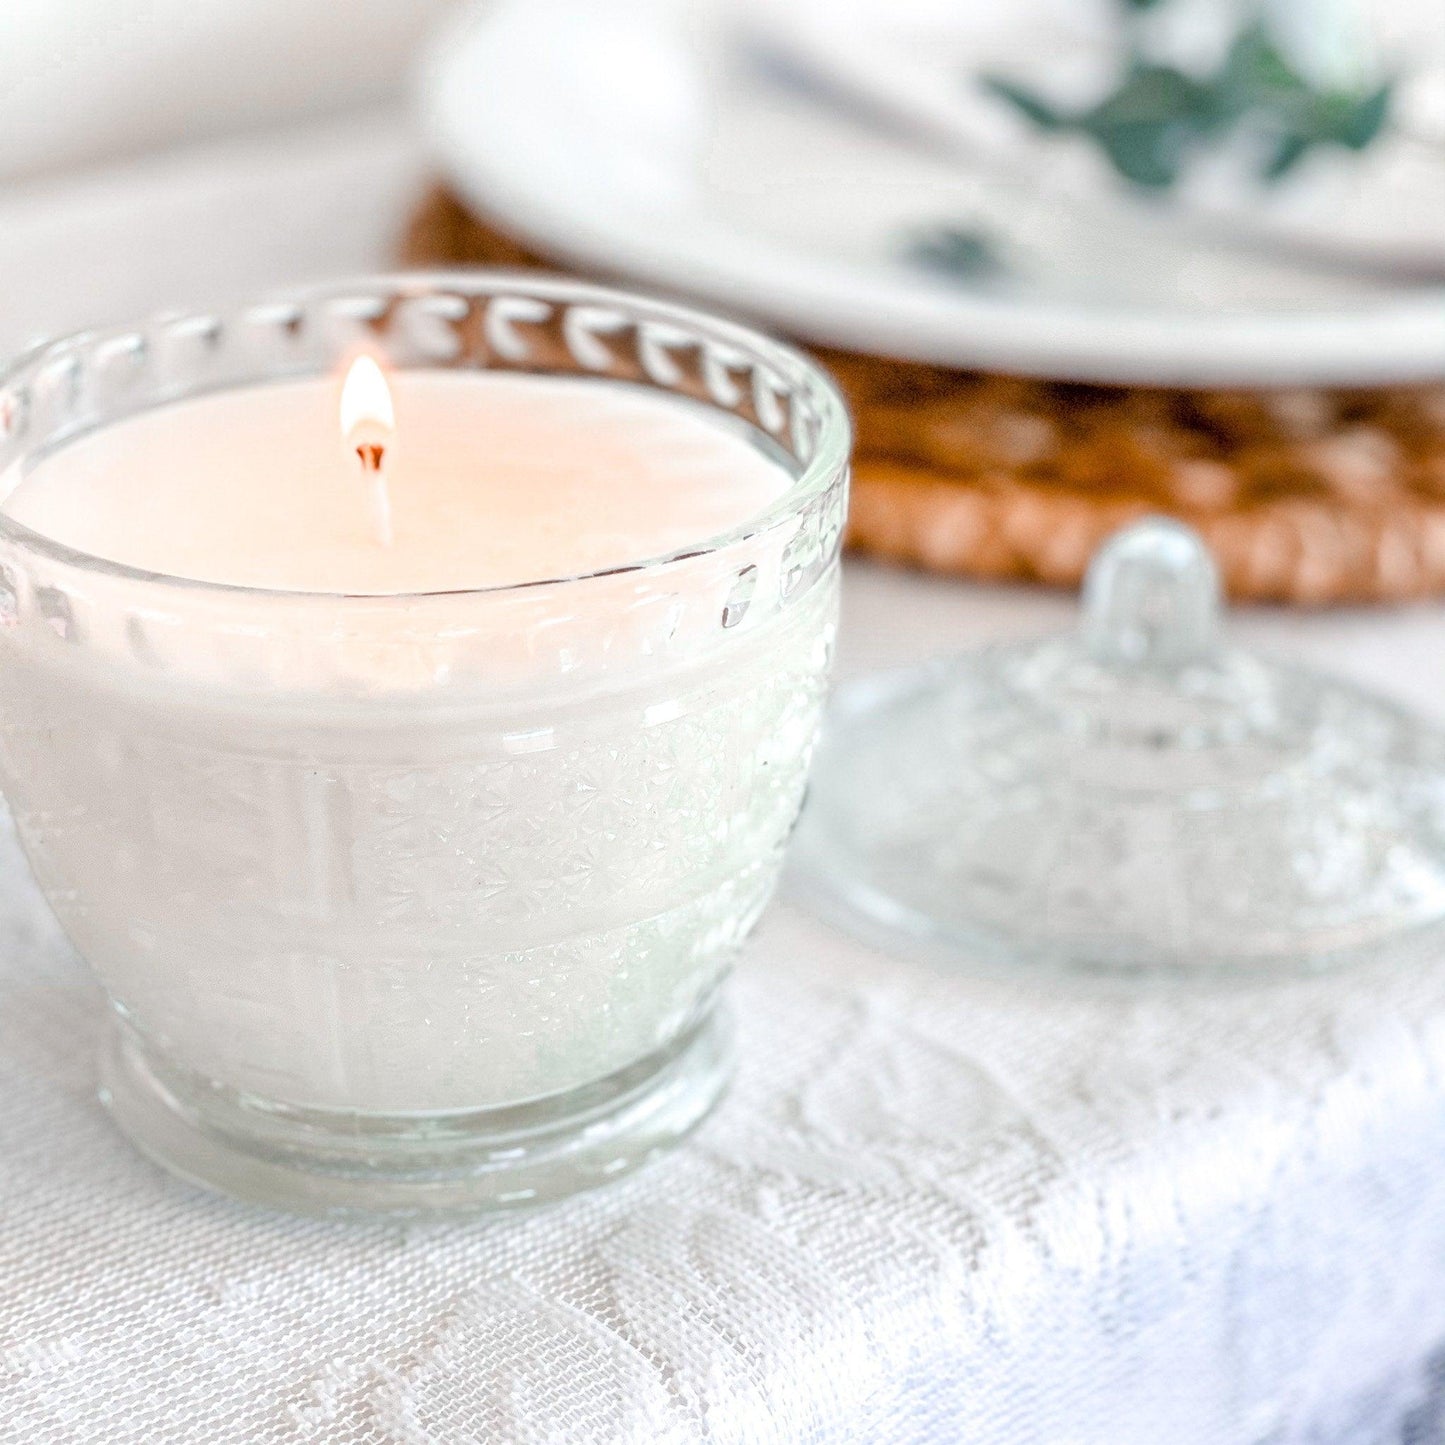 Scented Soy Candle in Vintage Candy Dish - RetroWix 